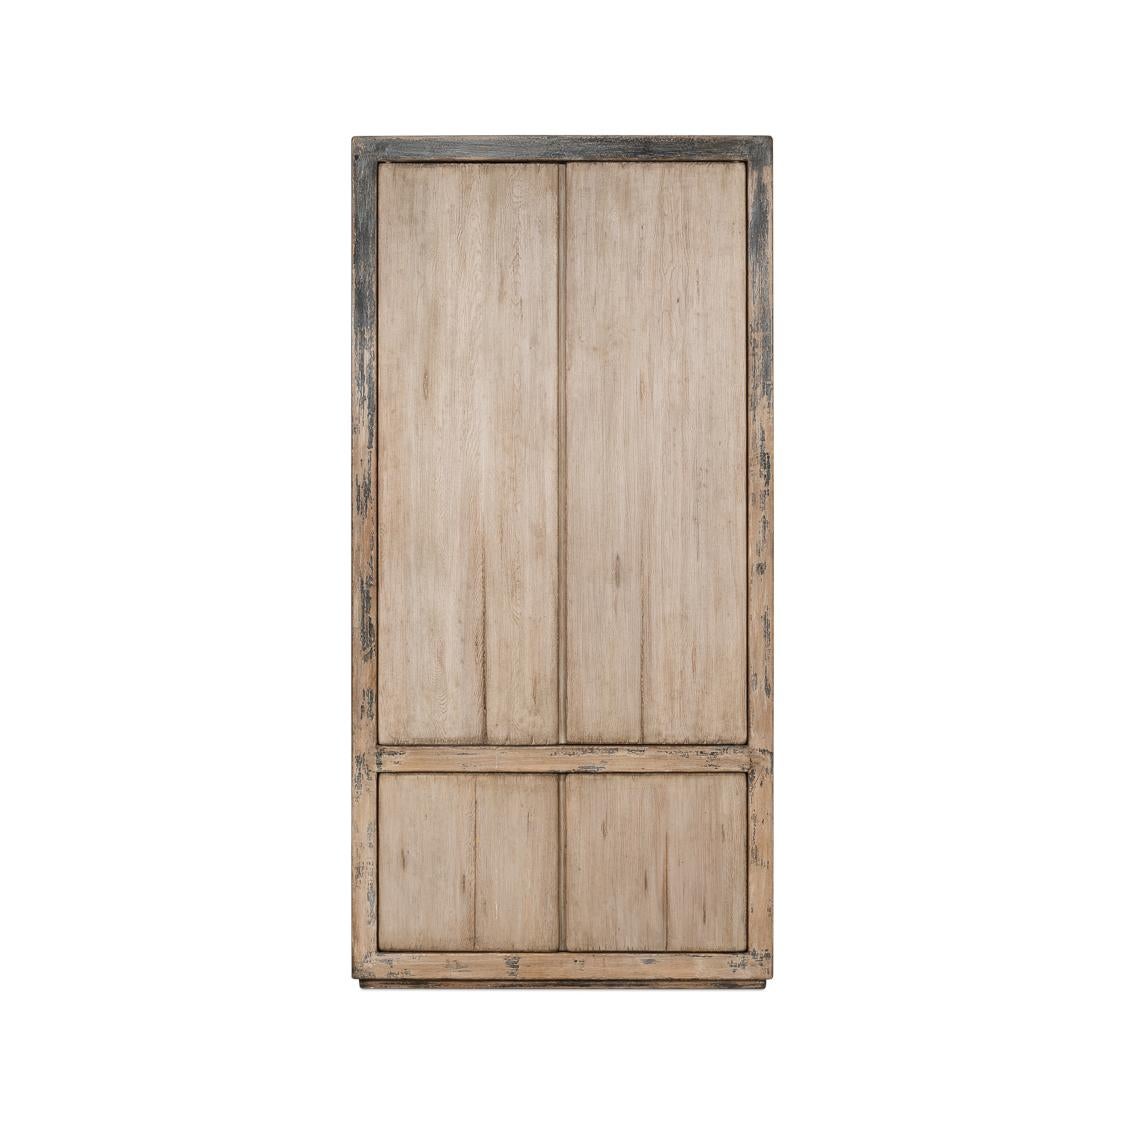 Made from reclaimed pine and finished in an antiqued and distressed French grey.

Standing proudly, it offers an imposing presence while promising an abundance of storage. With four cupboard doors that open to reveal removable shelves – the cabinet